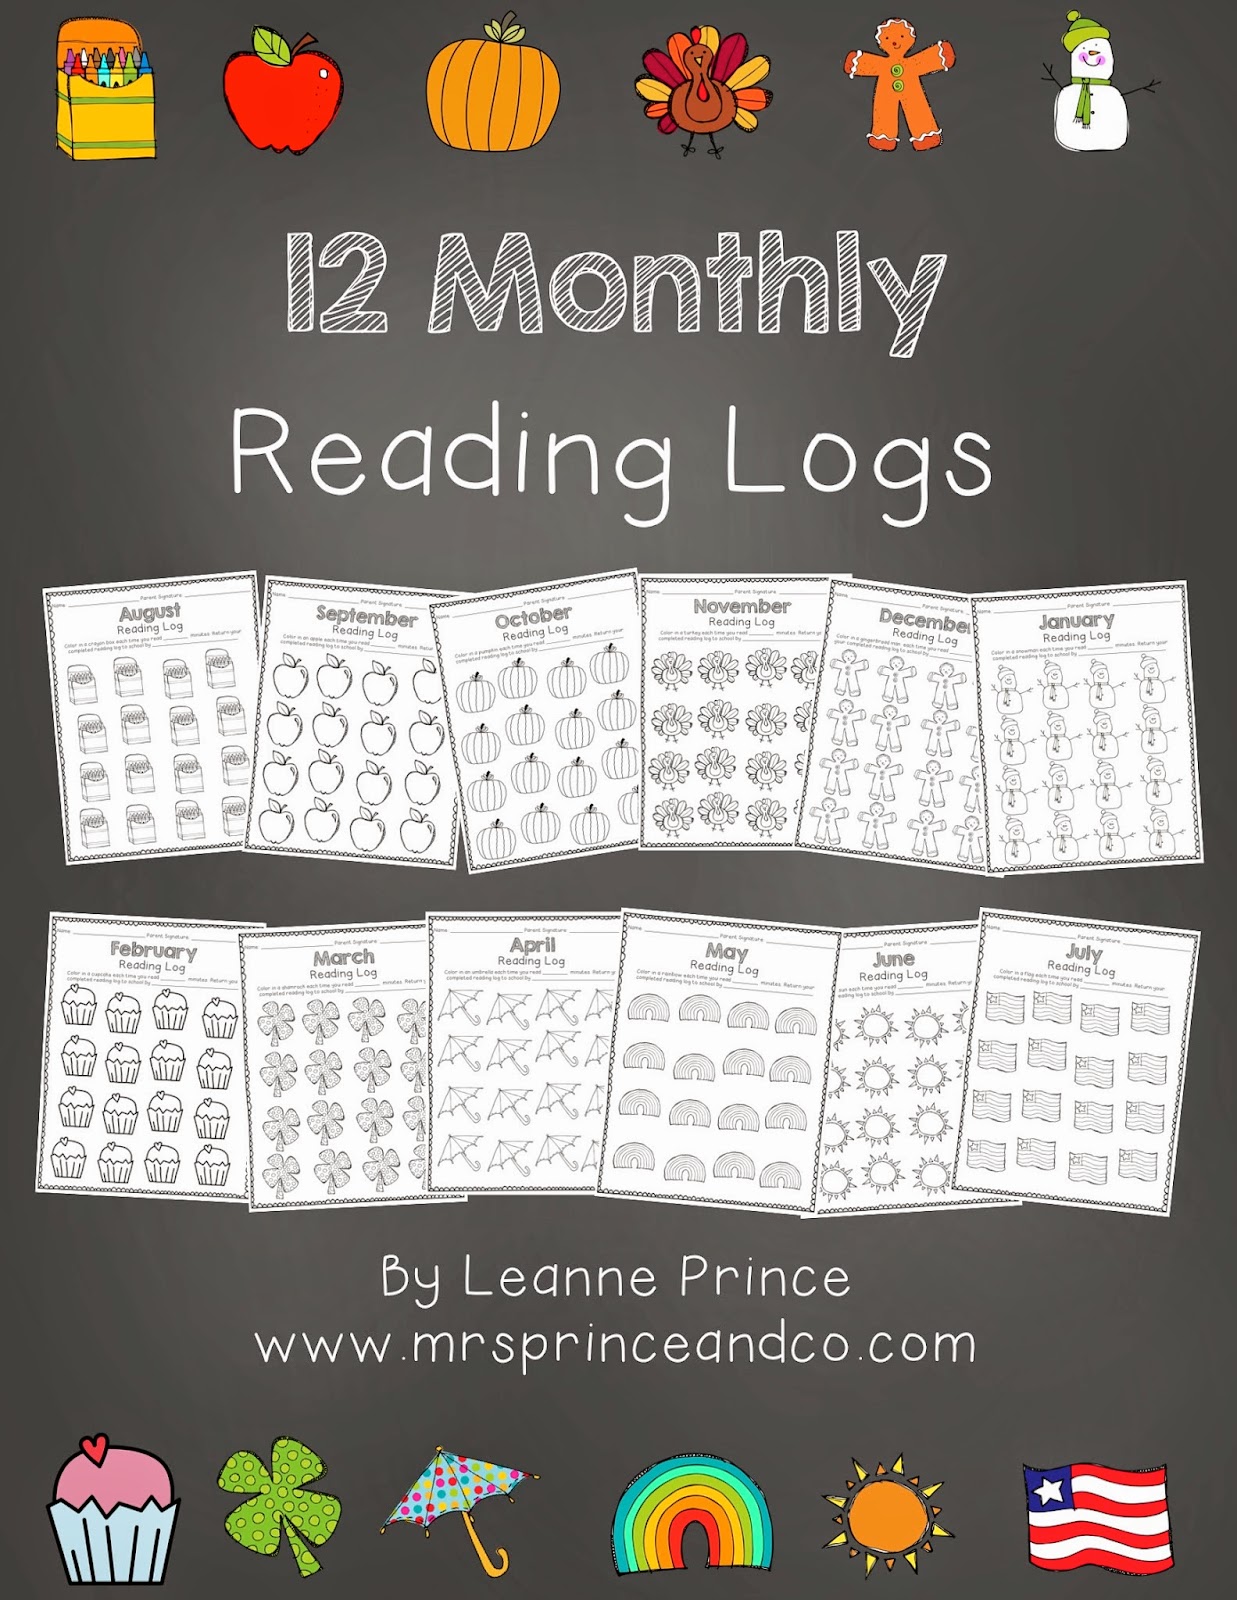 http://www.teacherspayteachers.com/Product/A-Year-of-Monthly-Reading-Logs-901034